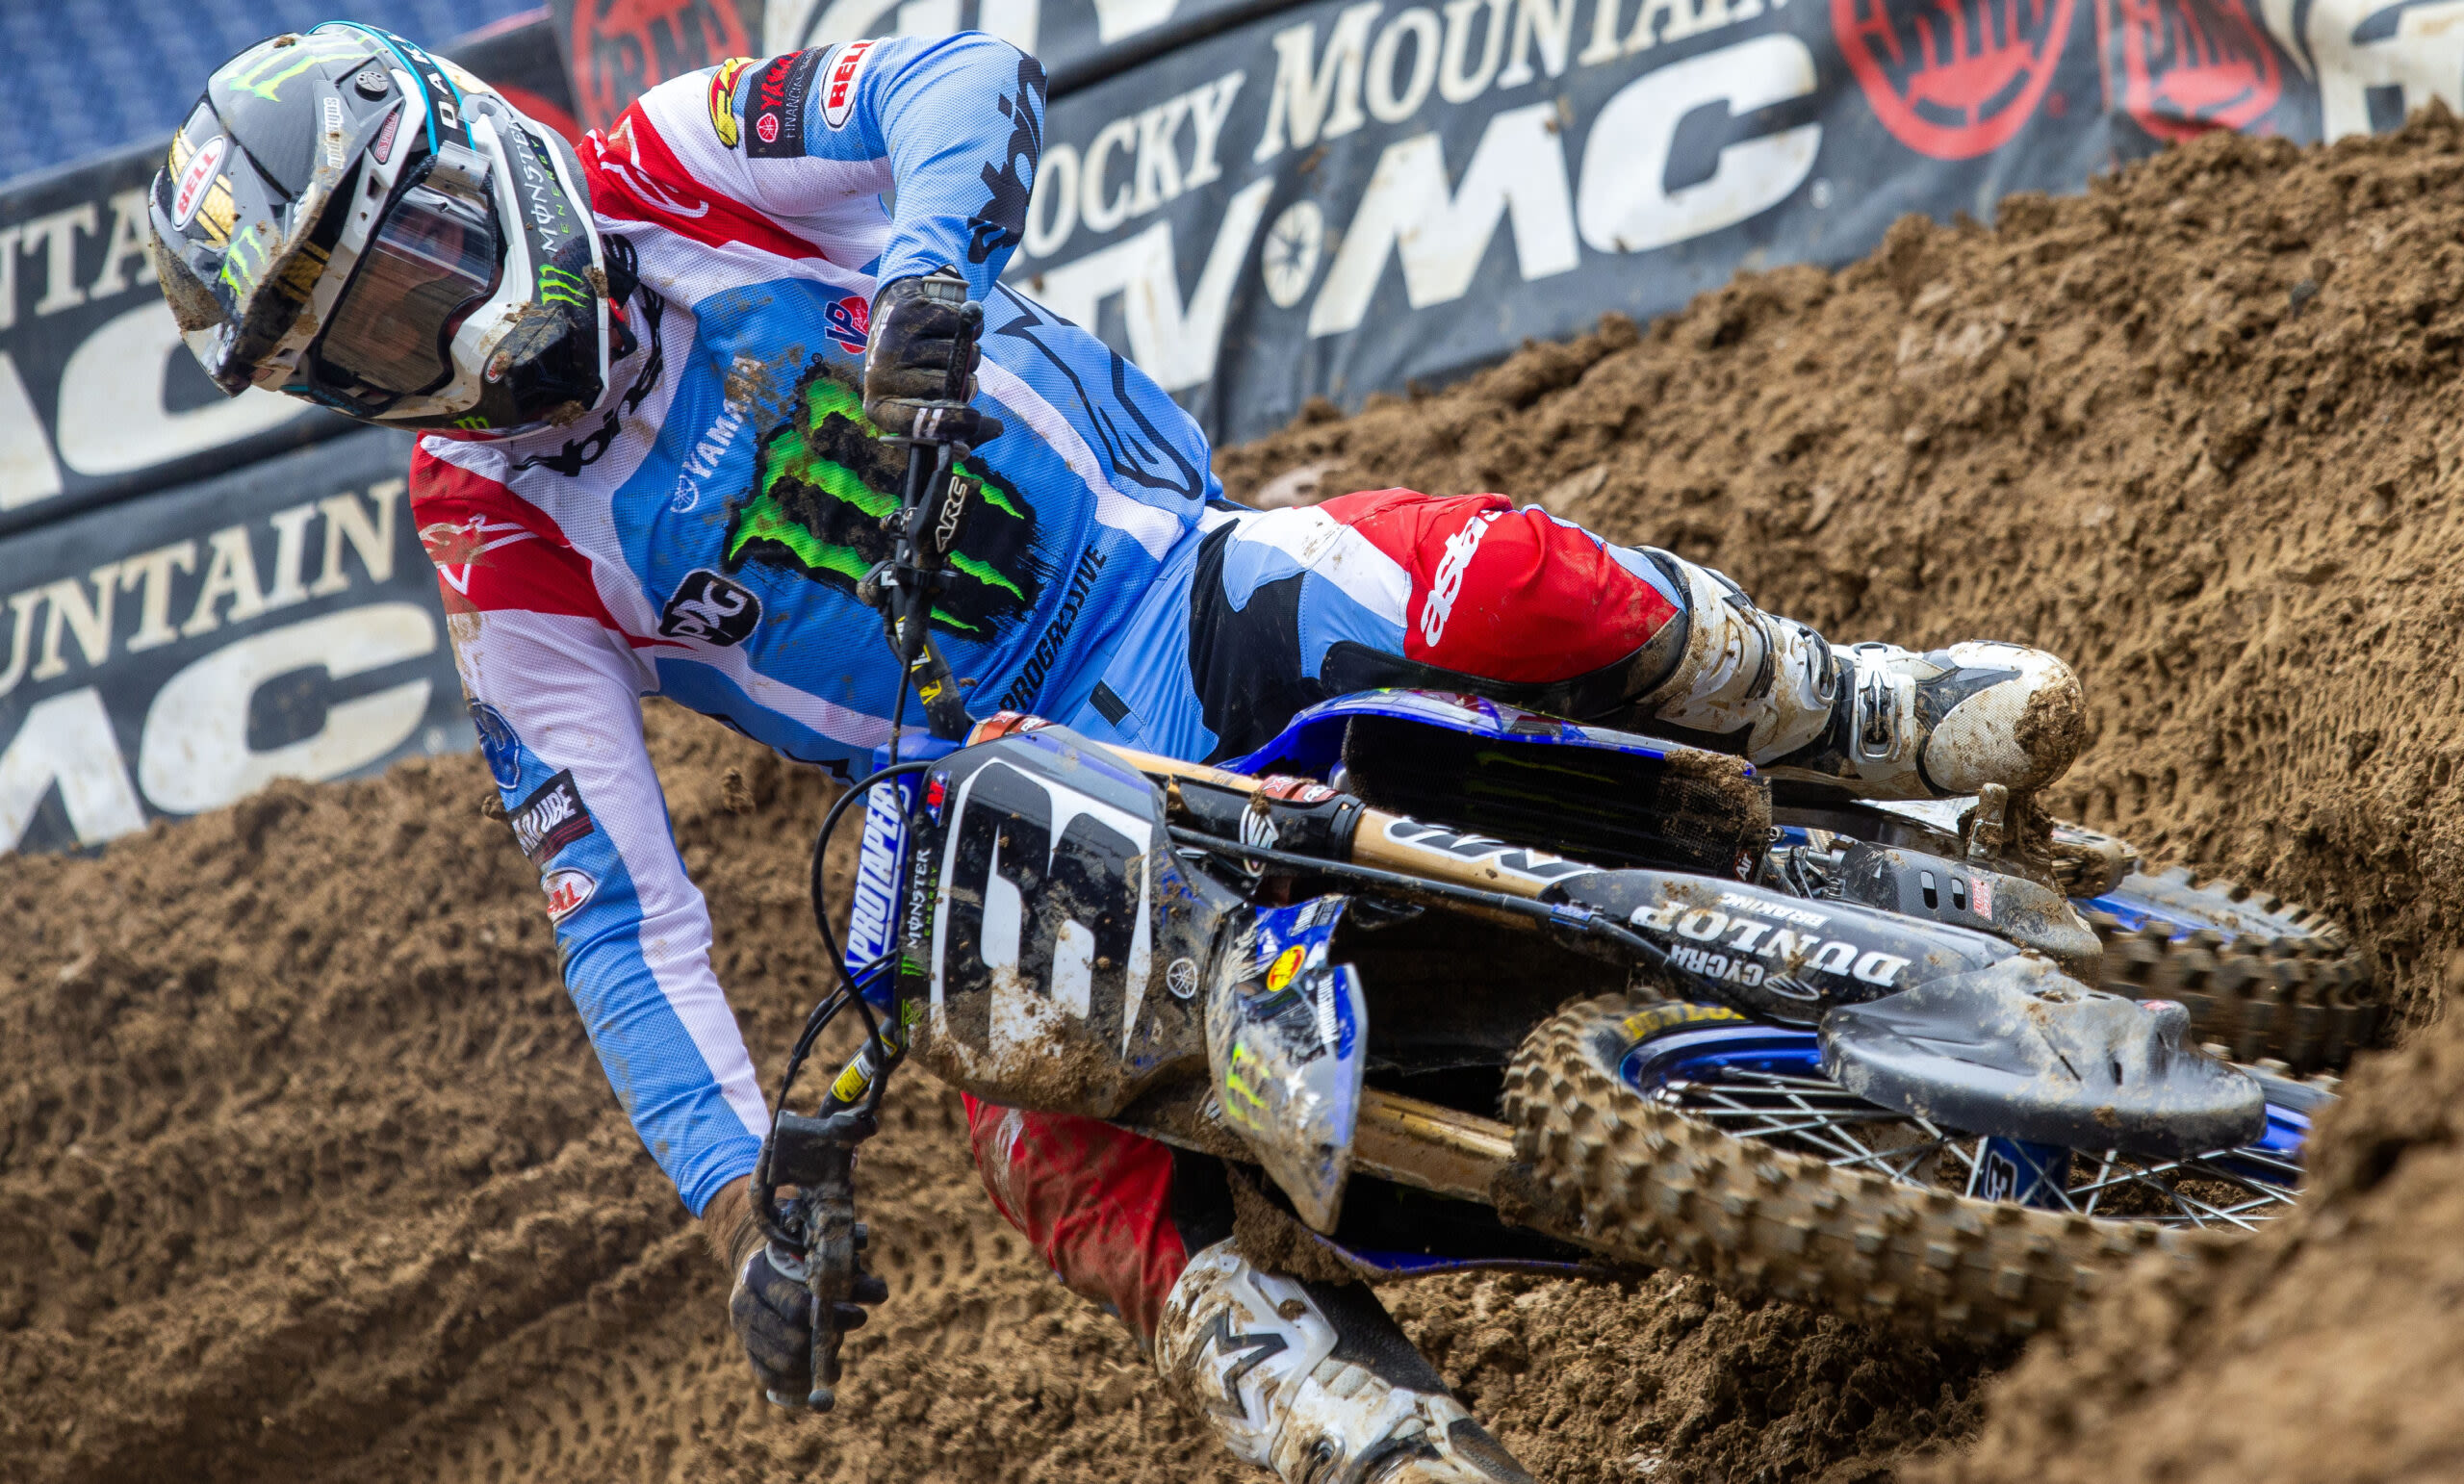 Tomac To Miss Supercross Finale and Pro Motocross Opener